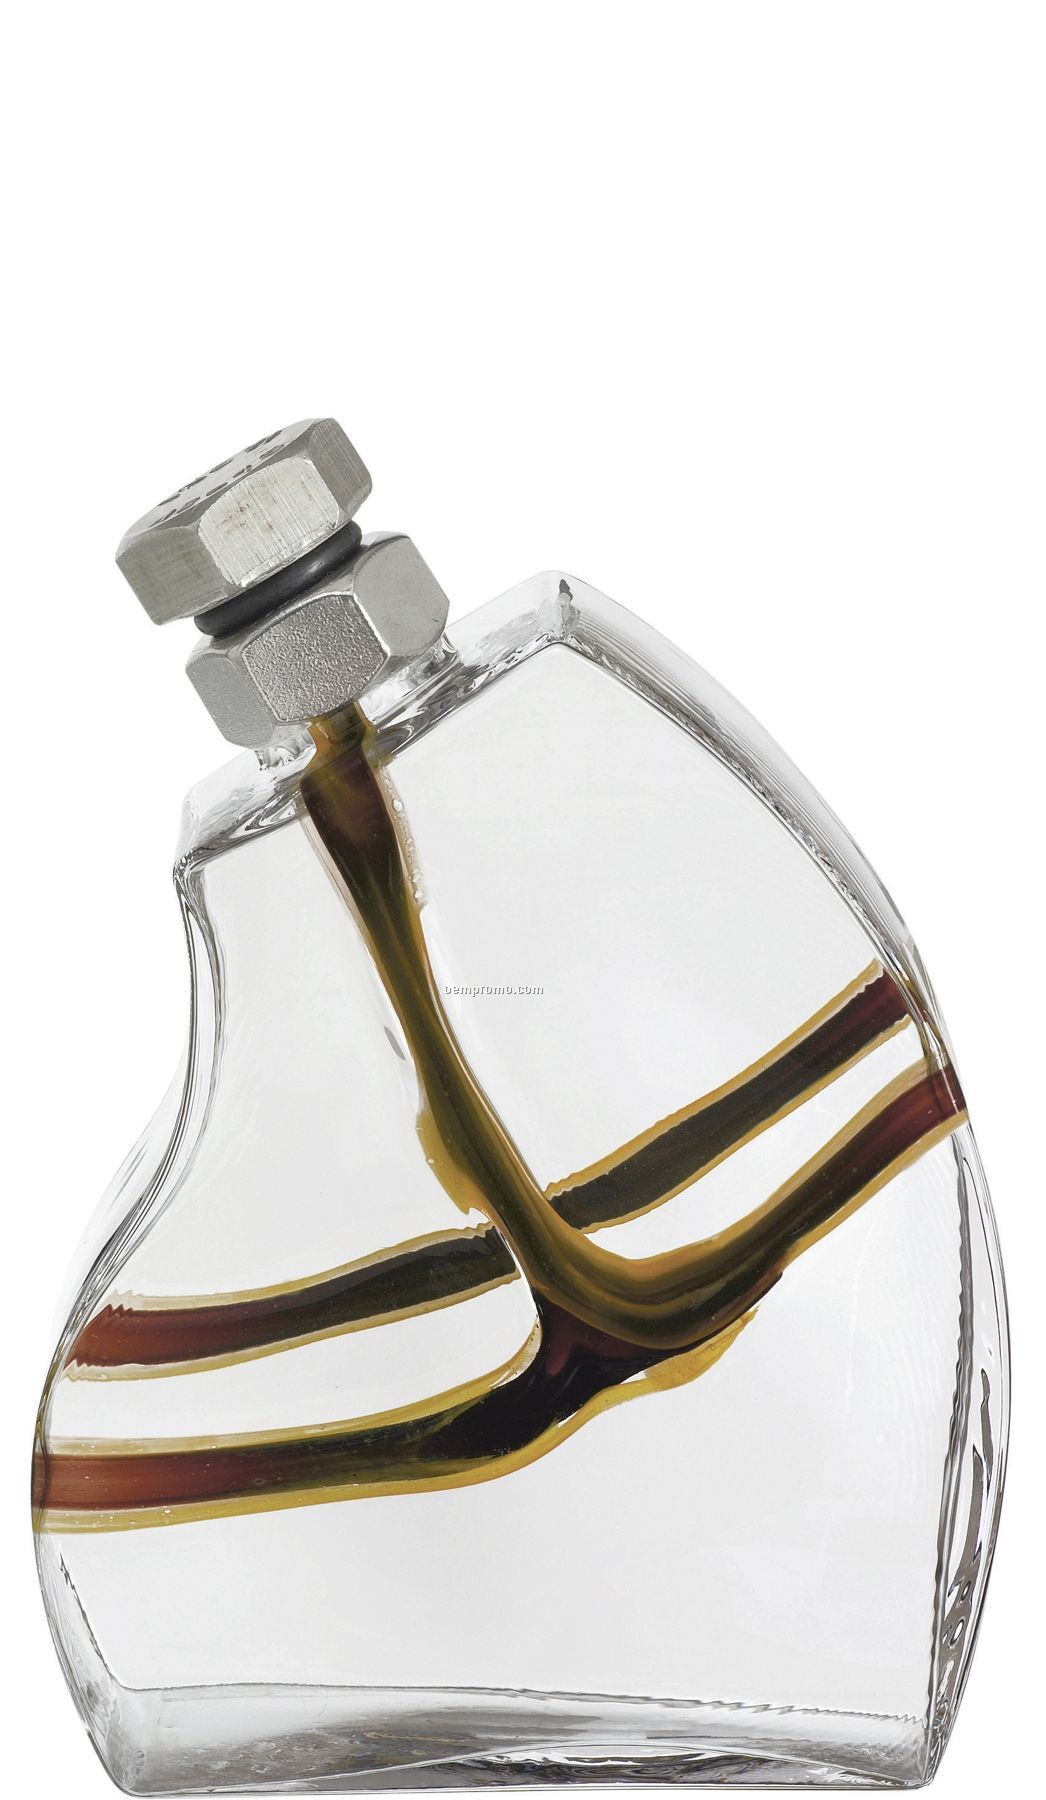 Macho Curved Glass Decanter By Kjell Engman (Yellow)